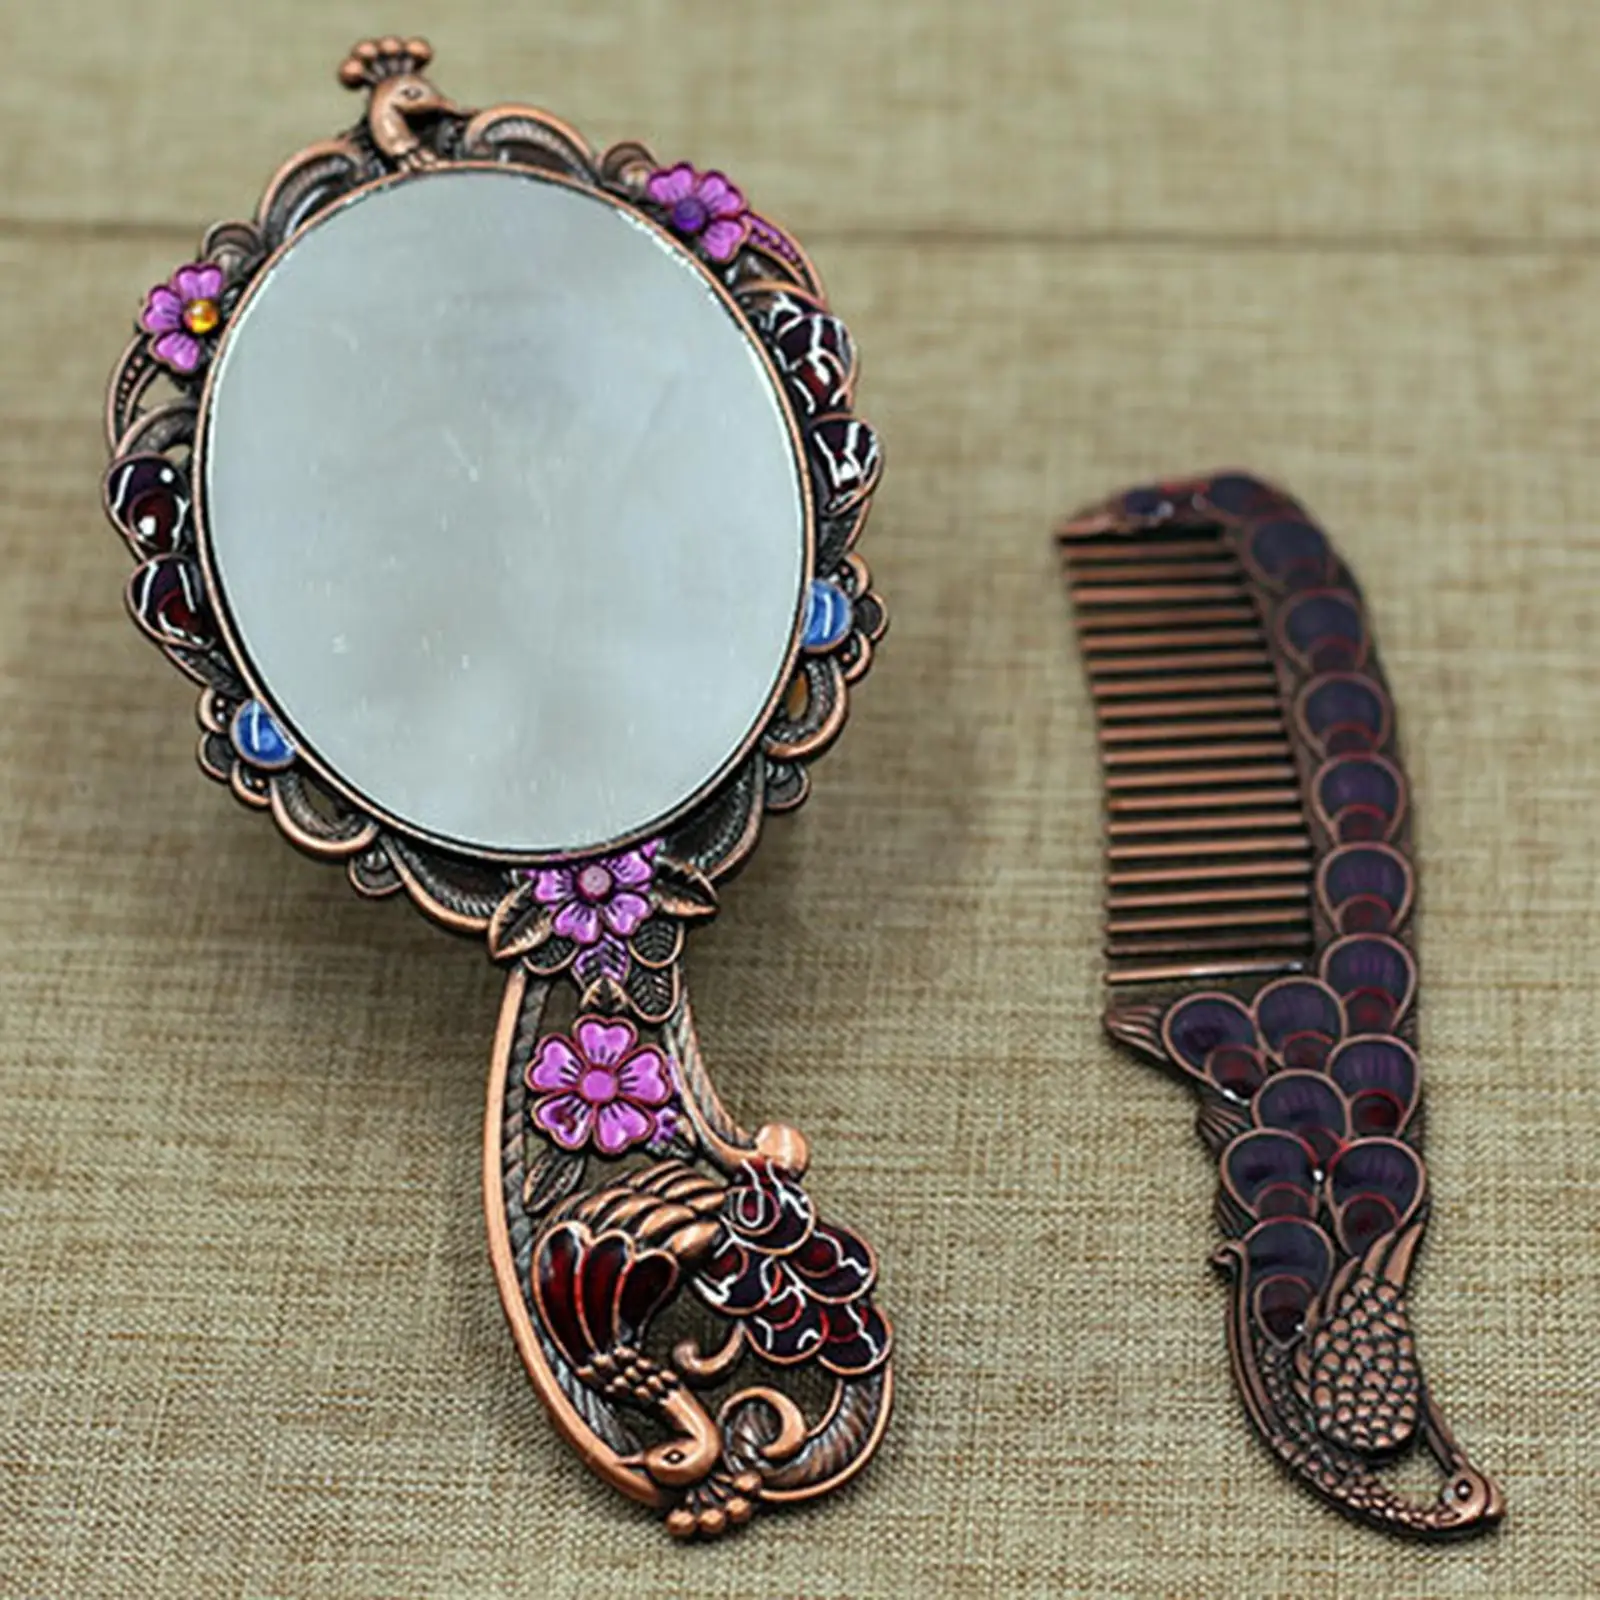 Embossing Oval Peacock Table Princess Mirror & Comb with Handle Decorative